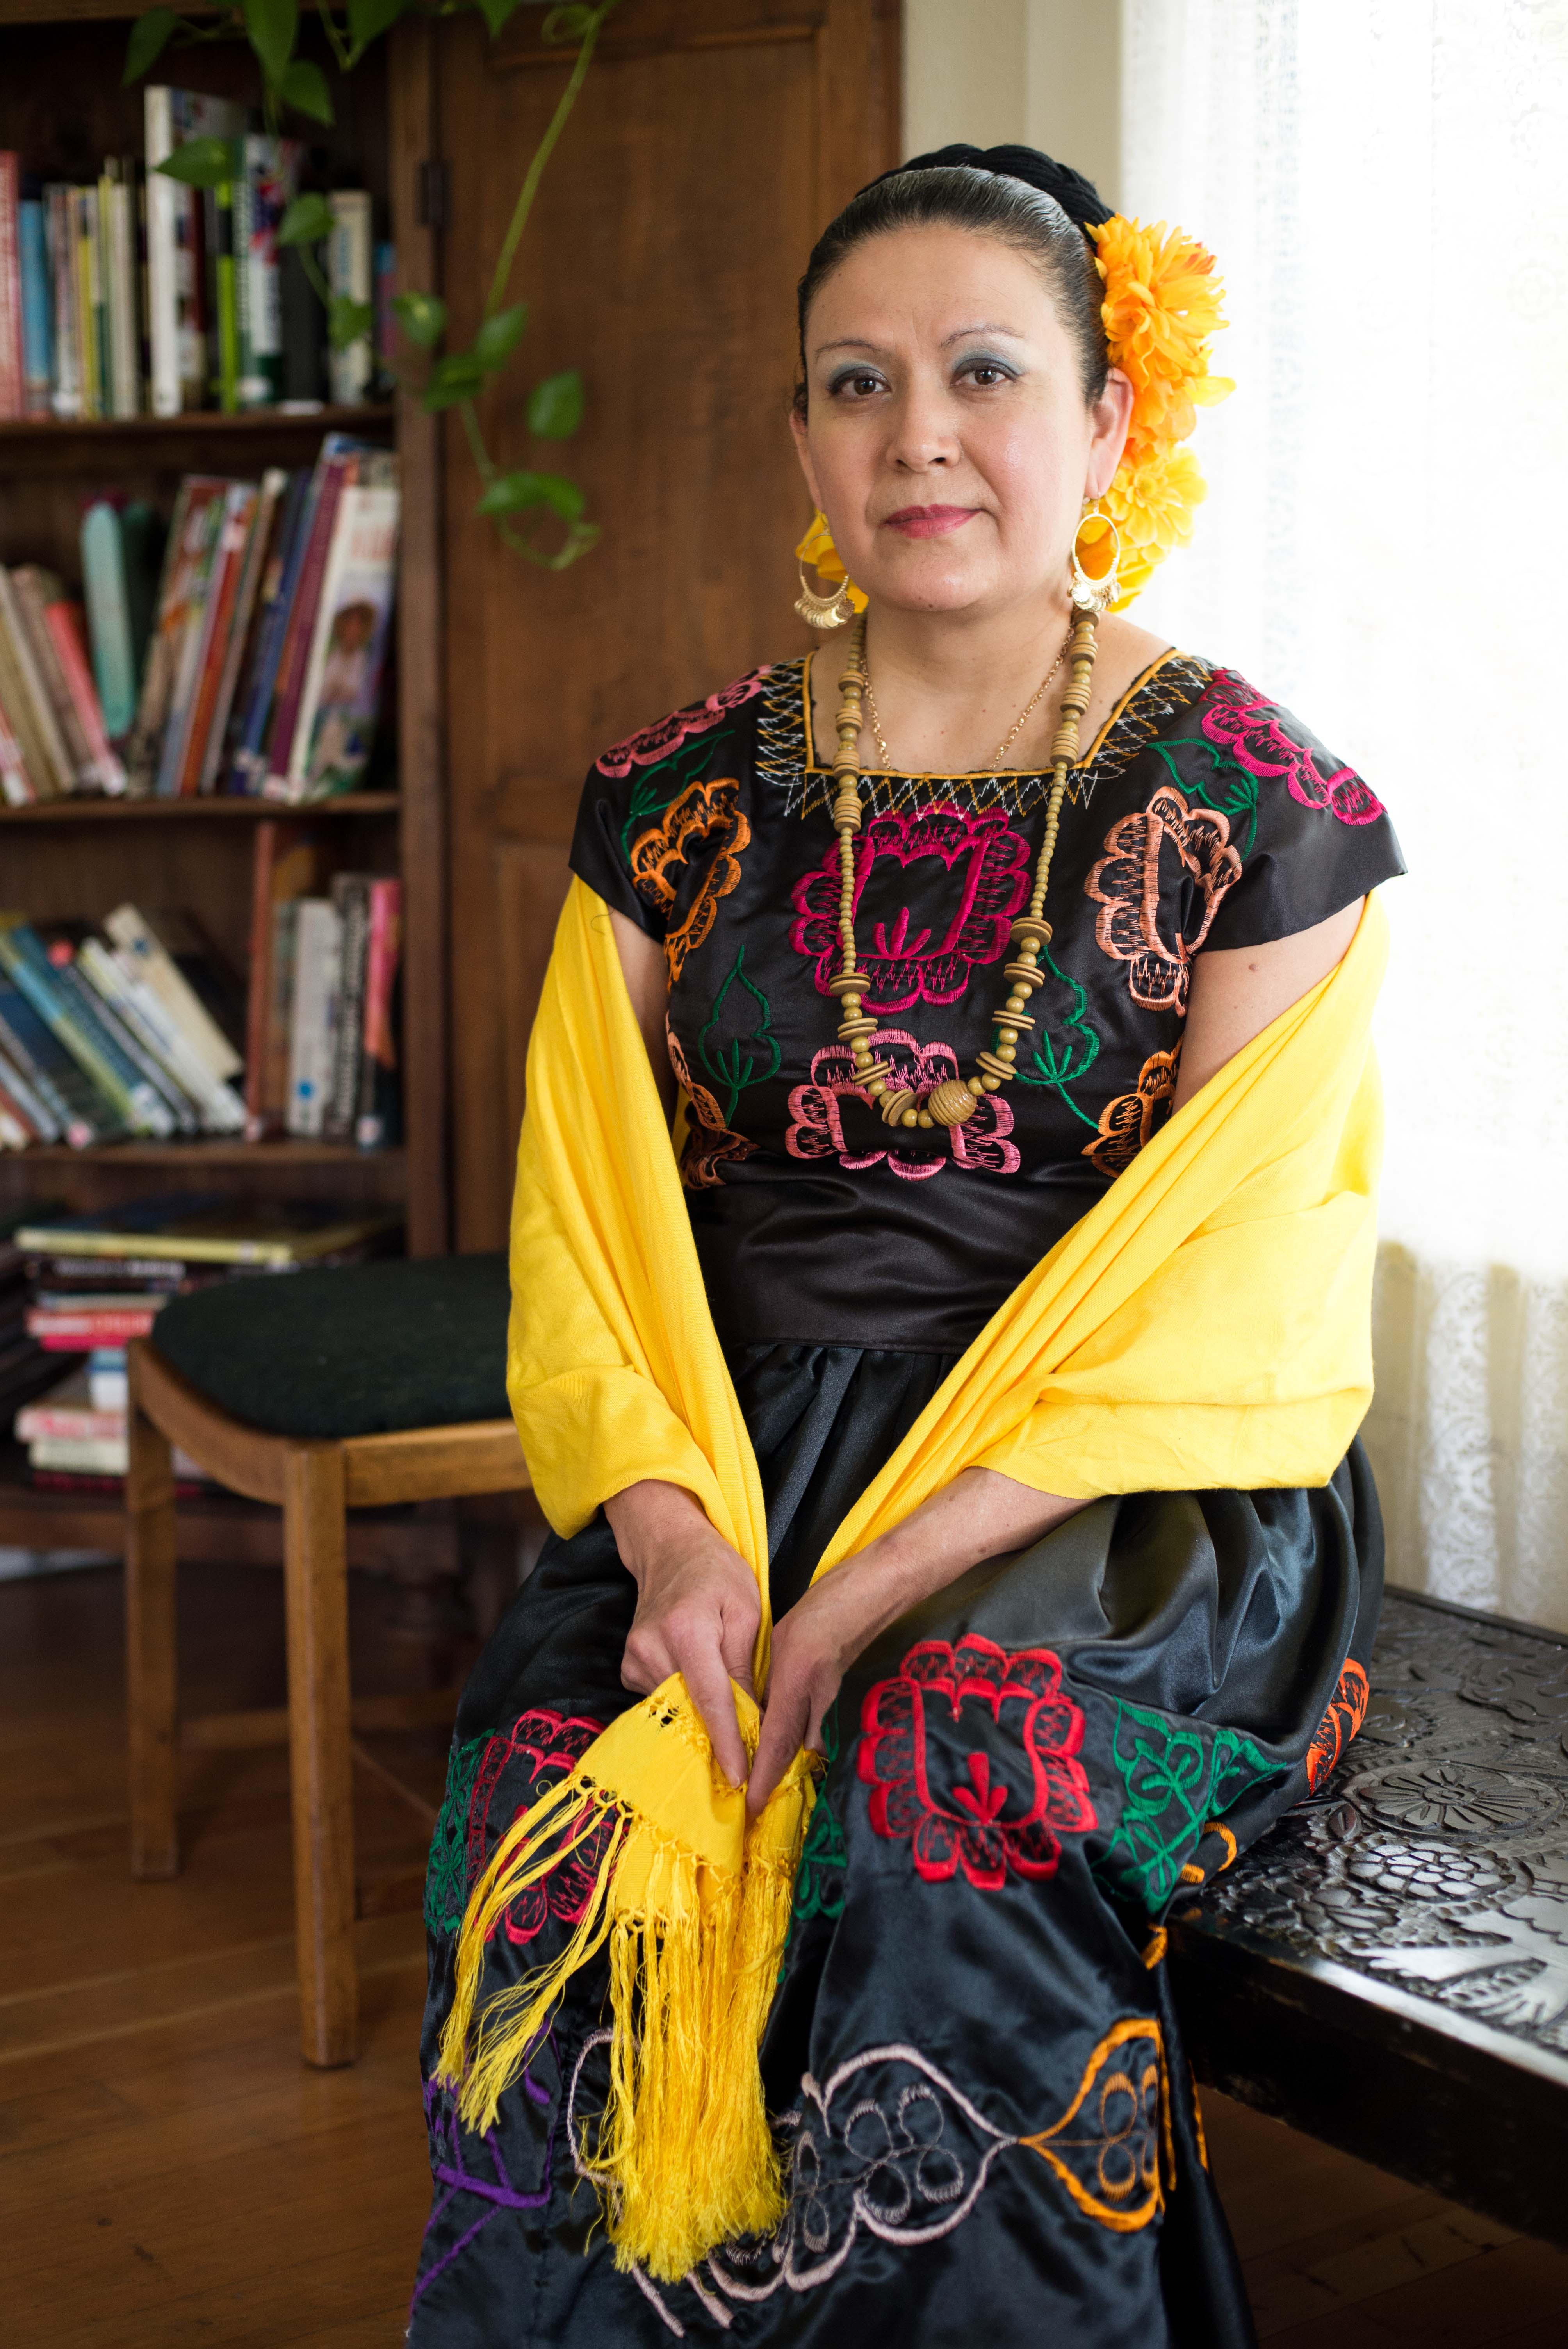 Maria Laguna sitting in a chair wearing her traditional dancing costume